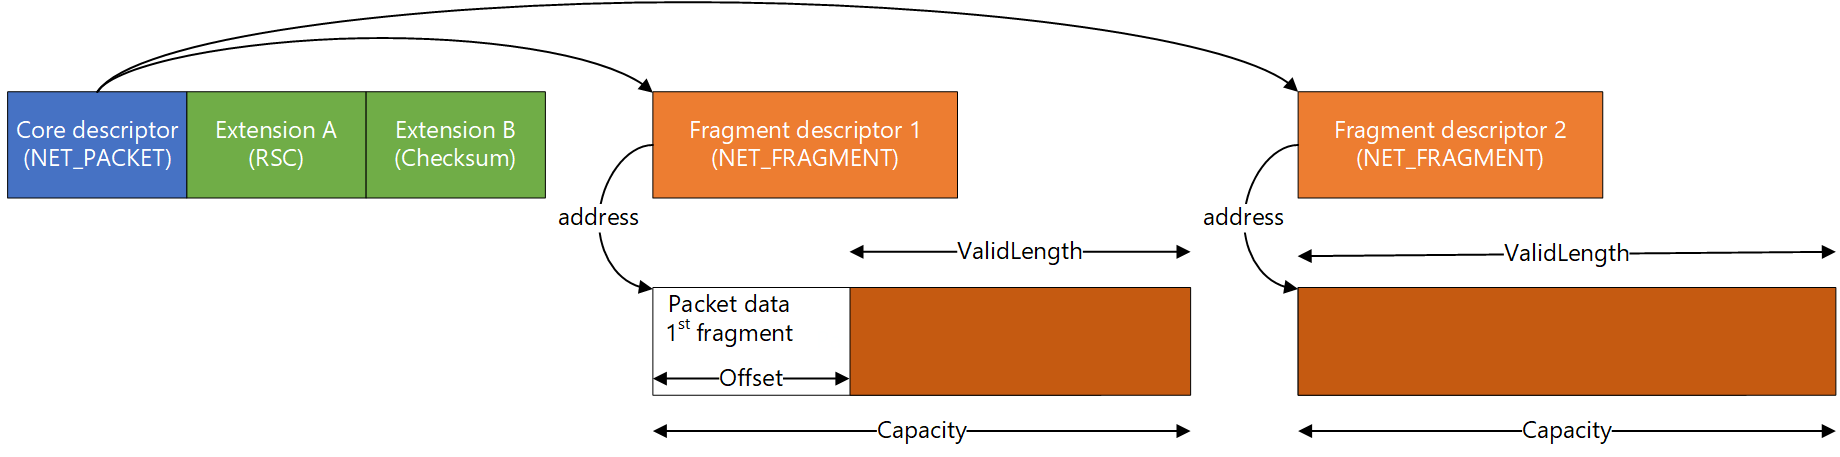 2 fragments packet layout.